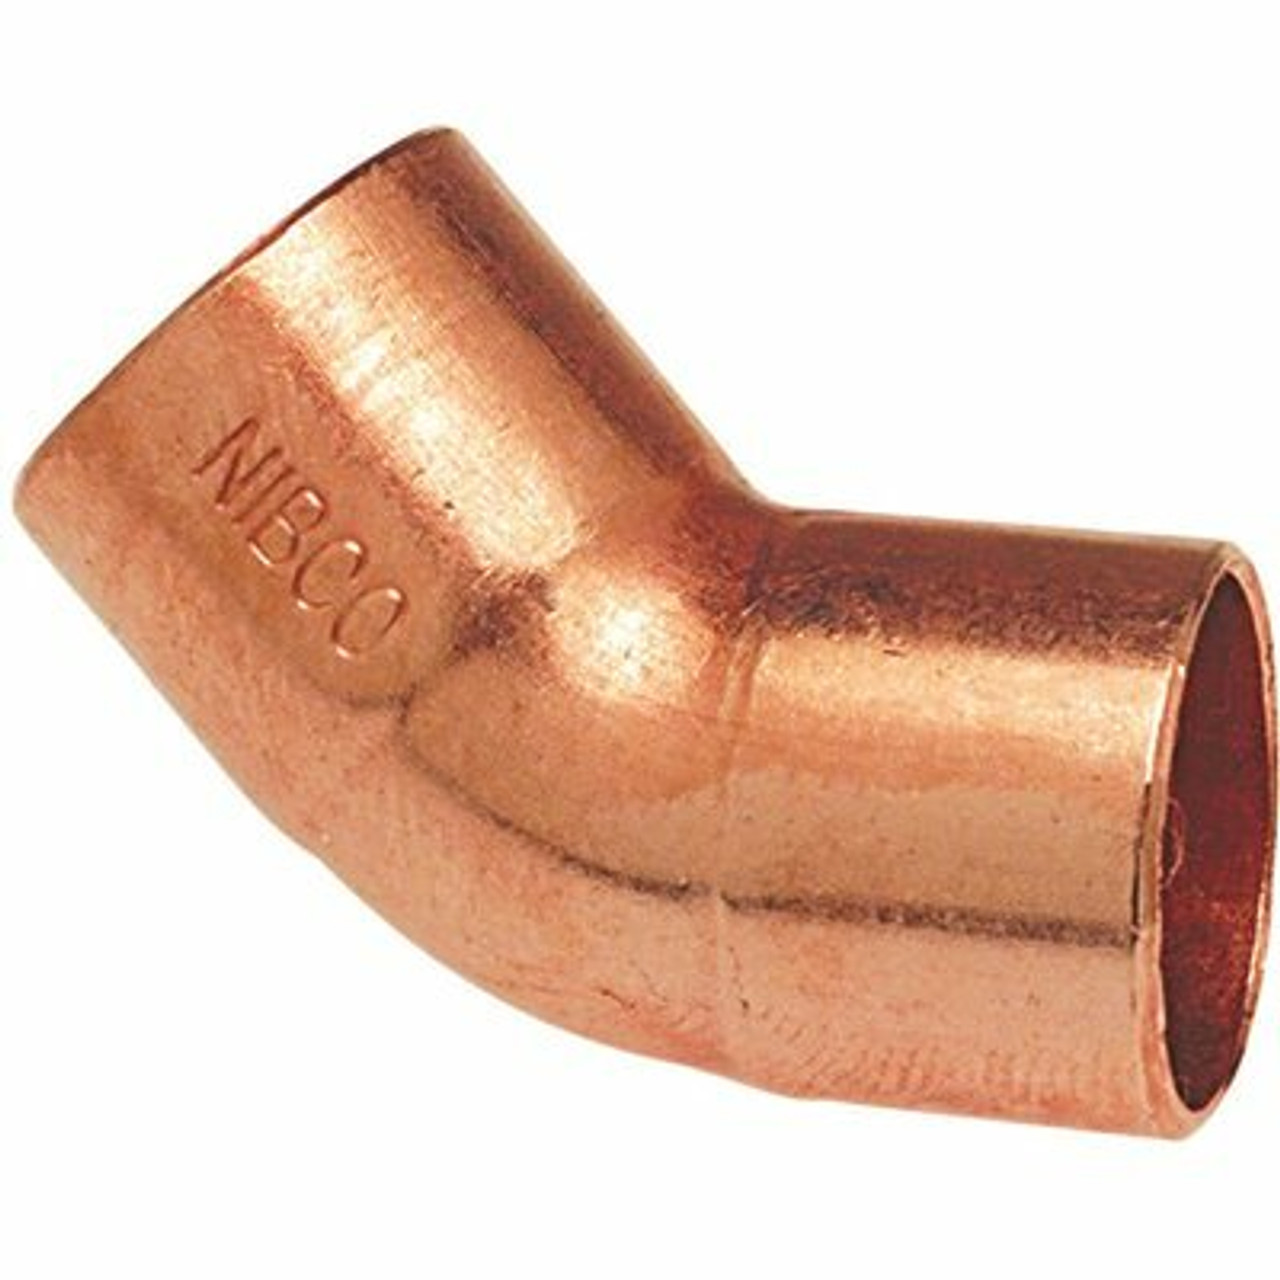 Nibco 3/4 In. Copper Pressure Ftg X Cup 45 Degree Elbow Fitting